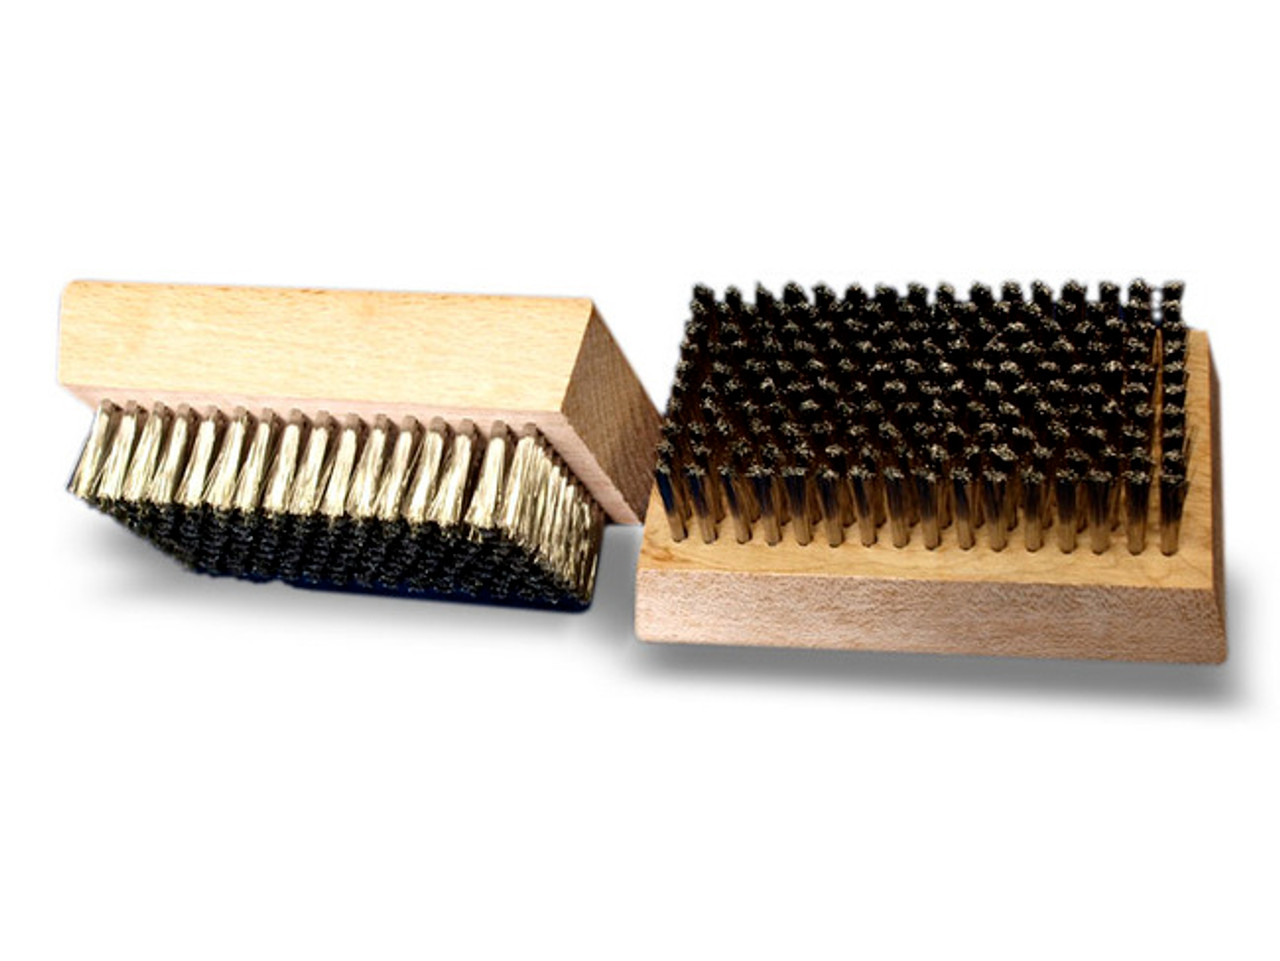 Anilox Plate Cleaning Brush - The Flexo Factor 704-962-5404